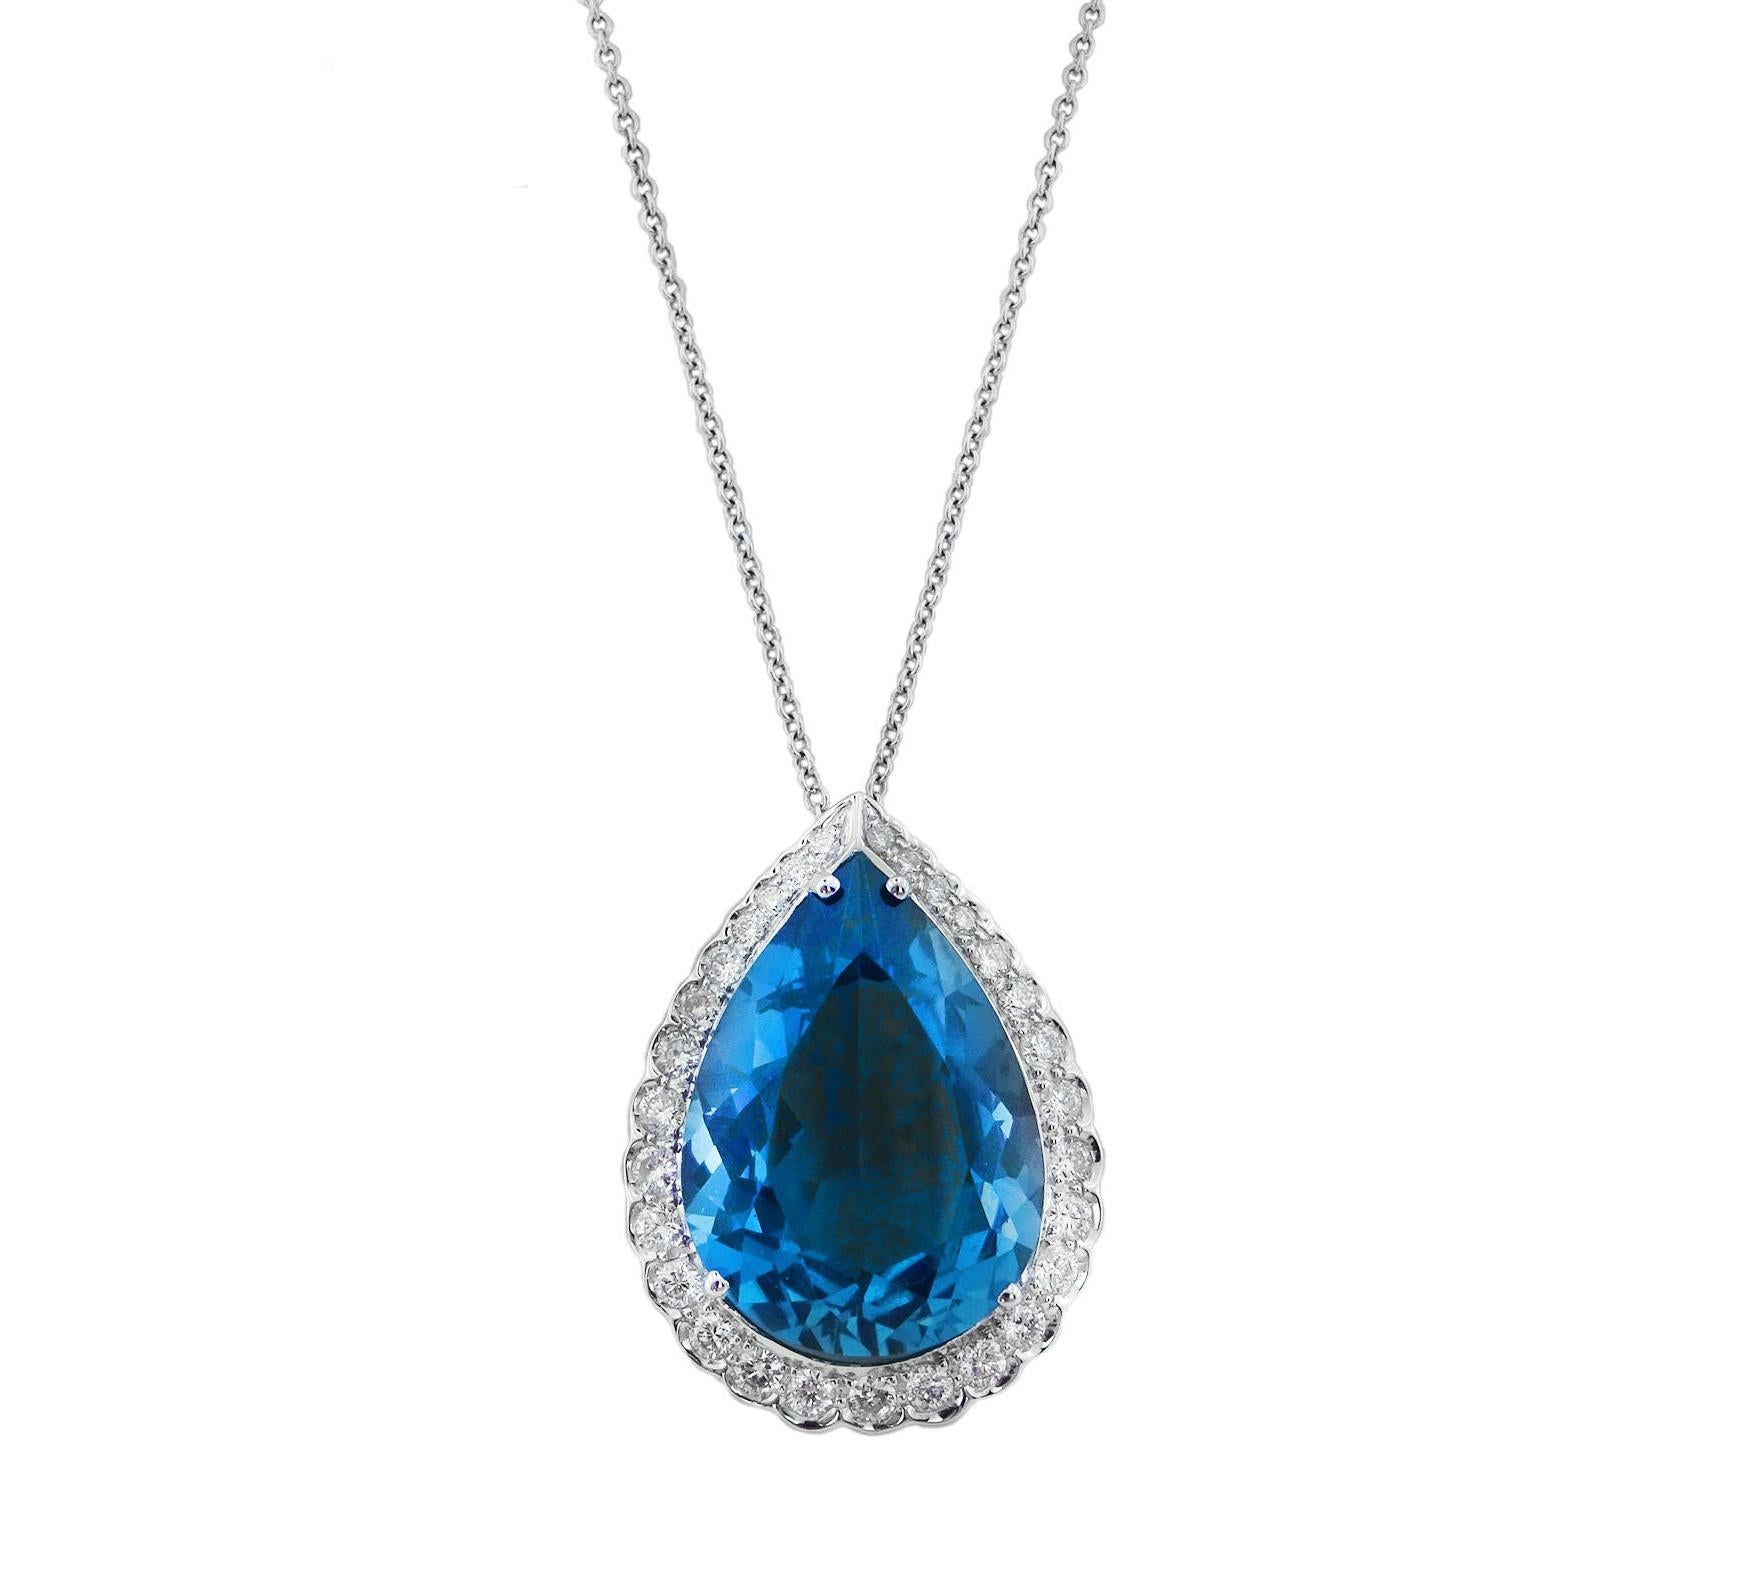 Set in 18K White gold


Total blue topaz weight: 11.00 ct
[ 1 stone ]
Total diamond weight: 0.64 ct
Color: F-G
Clarity: VS